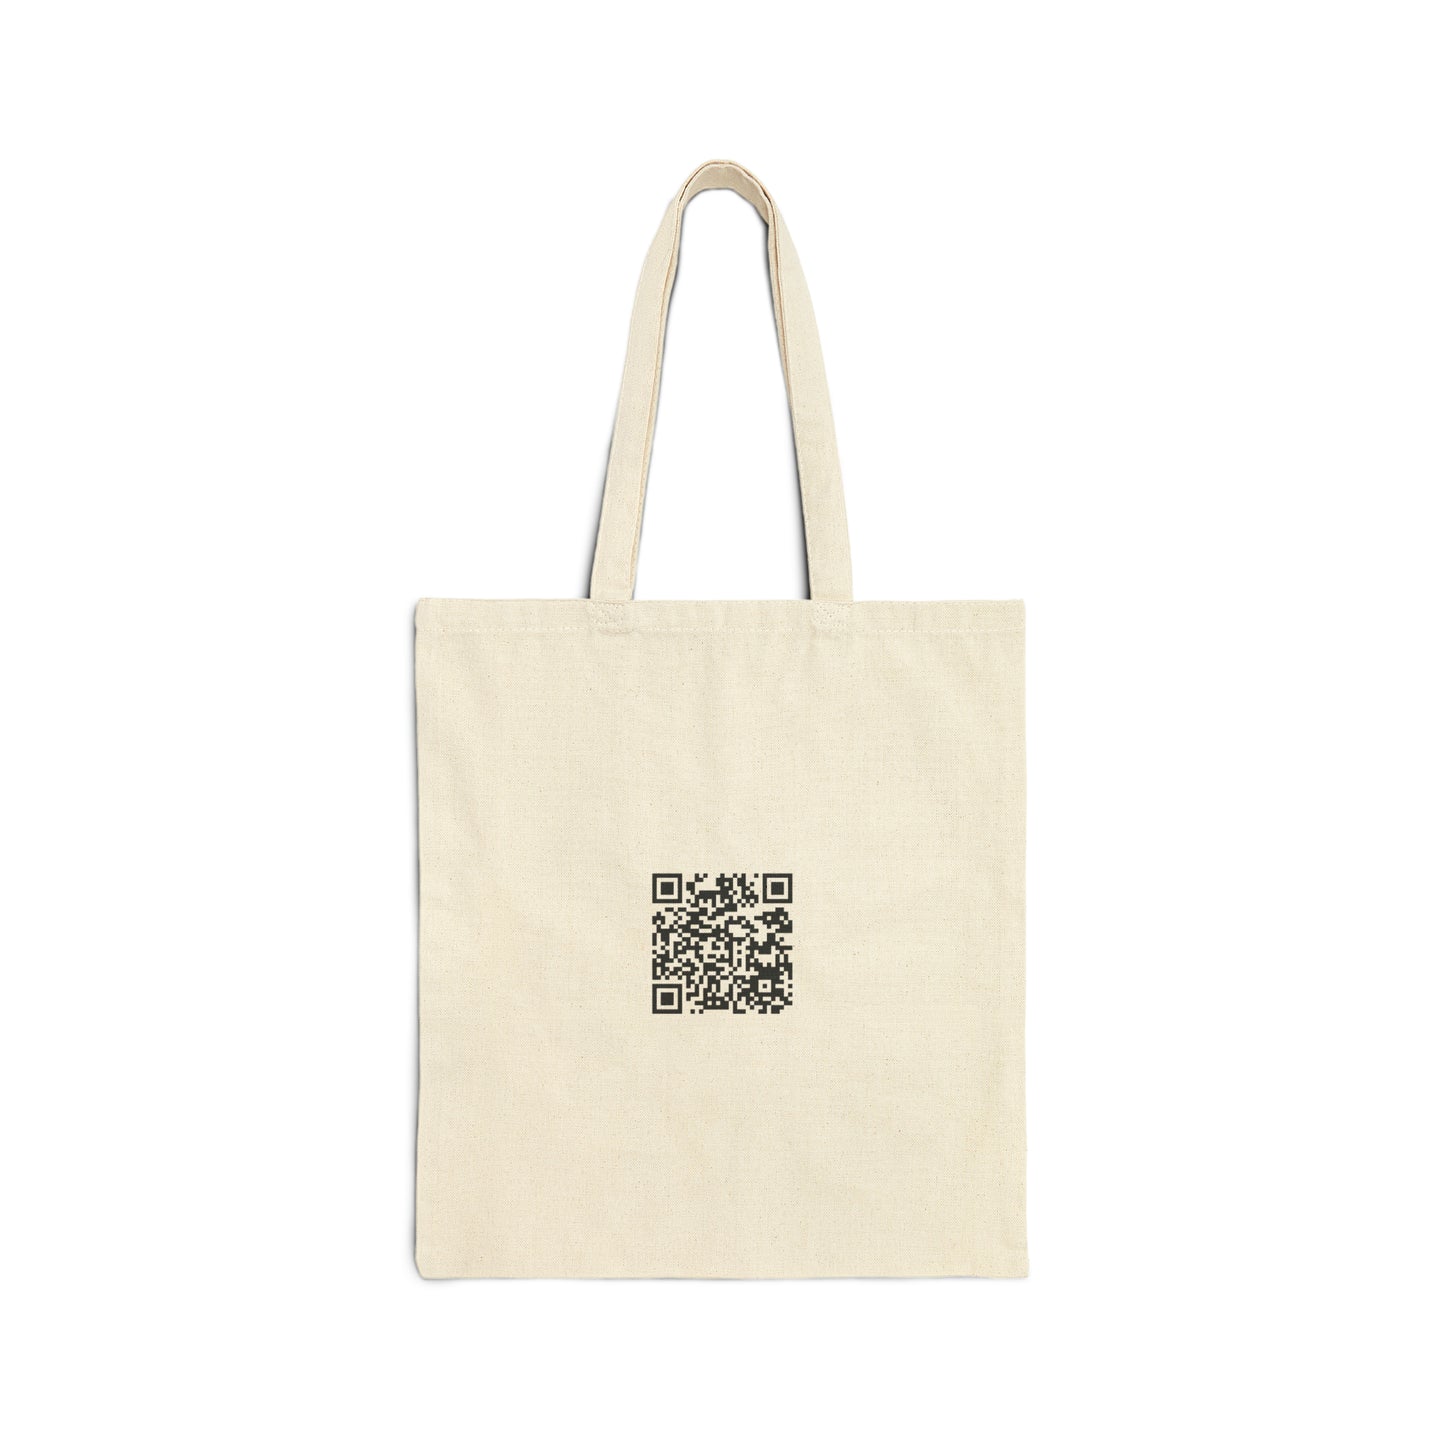 Stray Dog Blues - Cotton Canvas Tote Bag